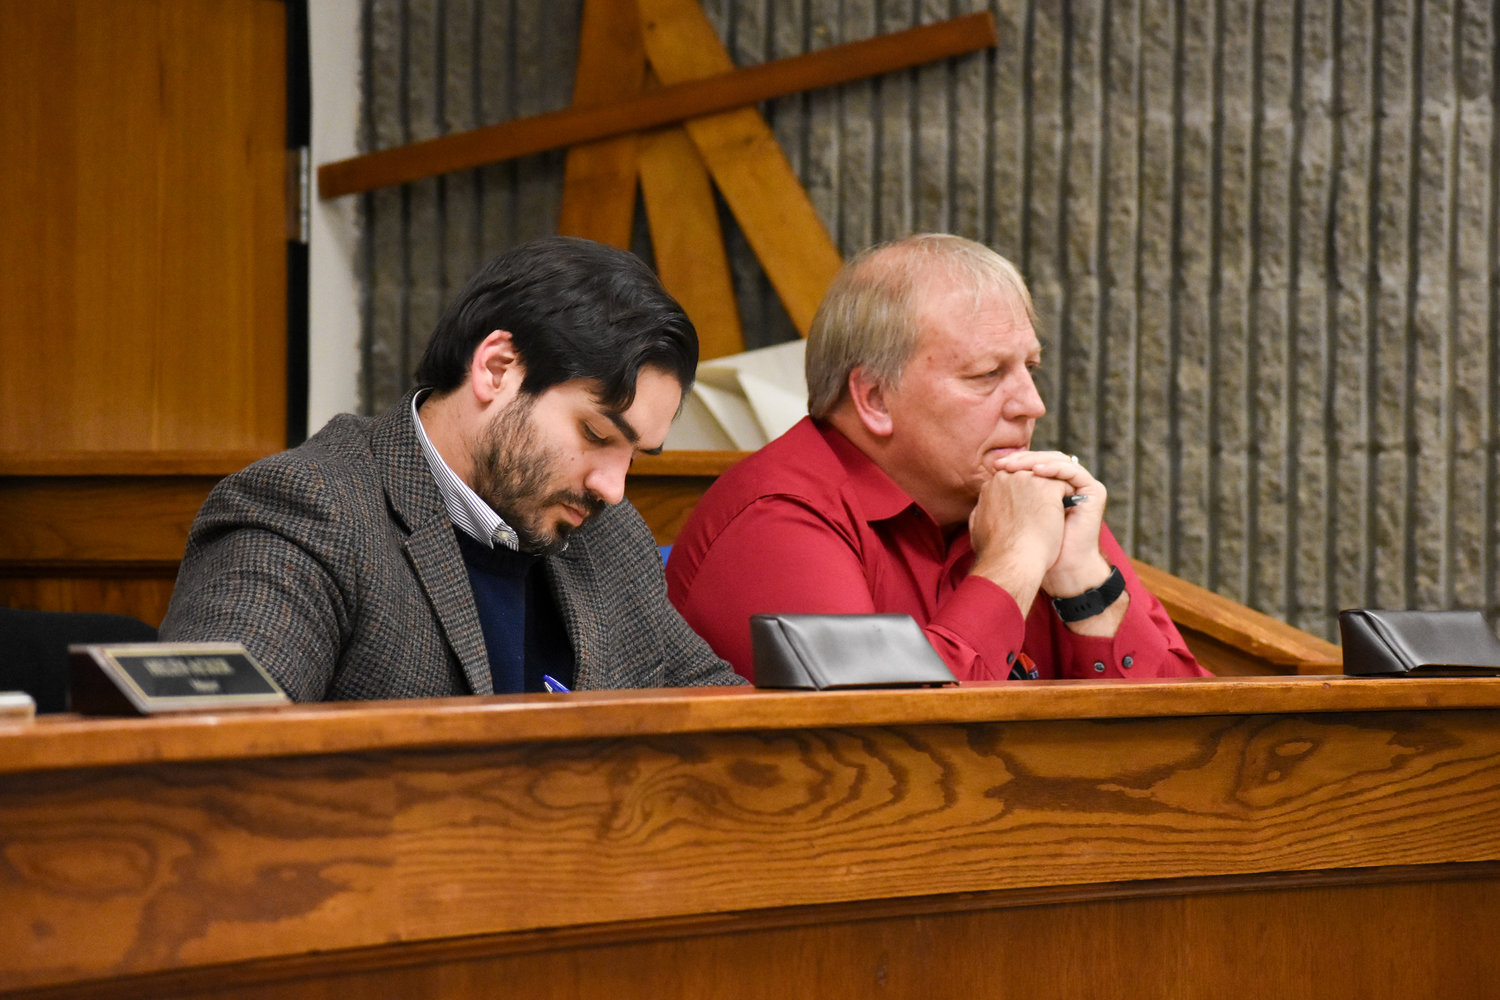 Village of Wampsville Mayor Jerry Seymour (right) and the village’s legal counsel (left) attend a public hearing at Oneida City Hall on Monday, Dec. 19, to discuss a petition requesting a section of Daniels Drive in Oneida to become part of Wampsville.